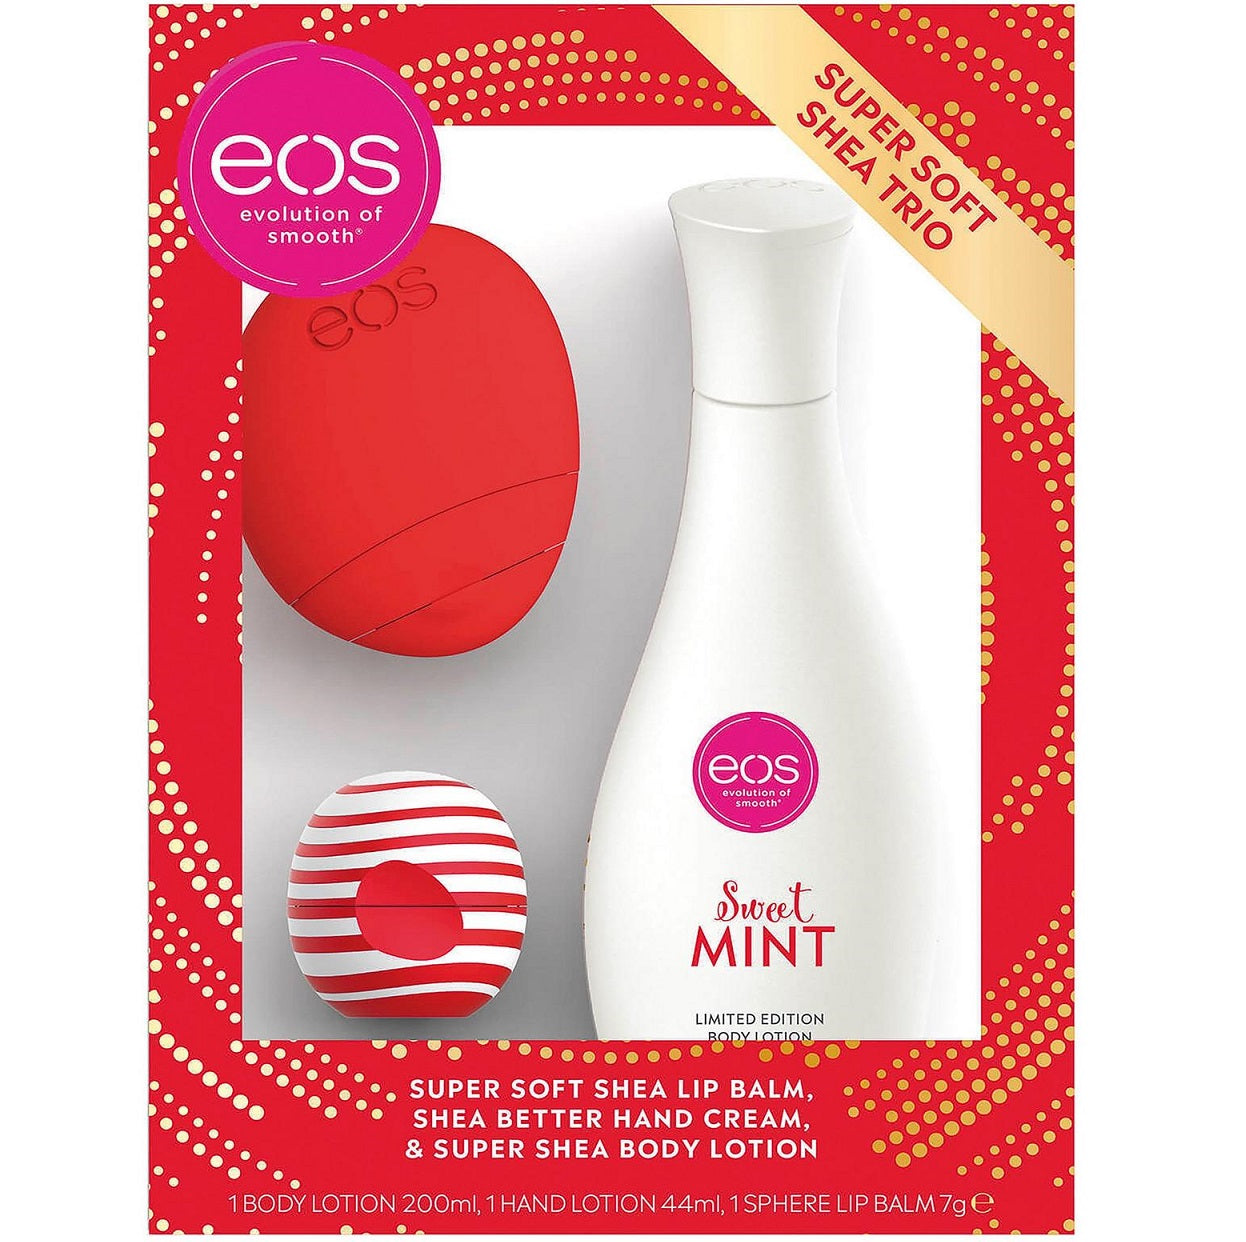 EOS Limited Edition Sweet Mint Super Soft Shea Trio Gift Set